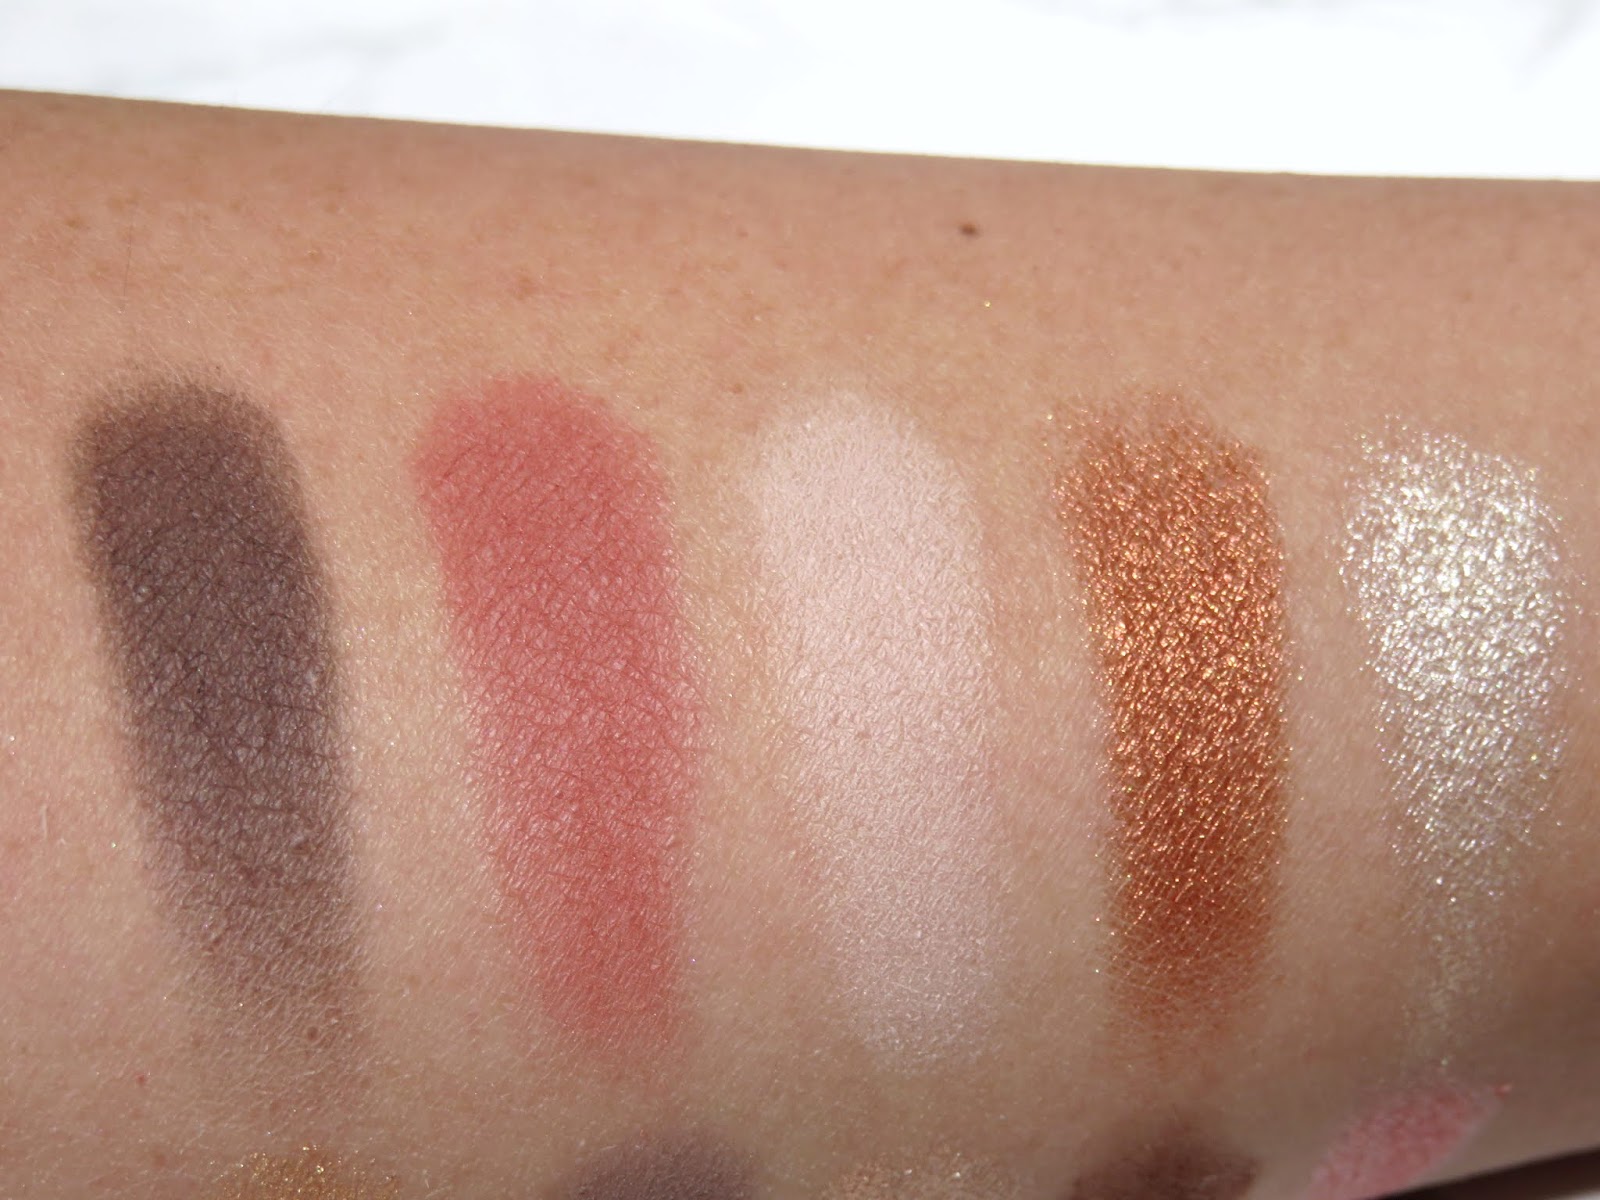 By Terry V.I.P Expert Paris By Light Eyeshadow Palette Swatches